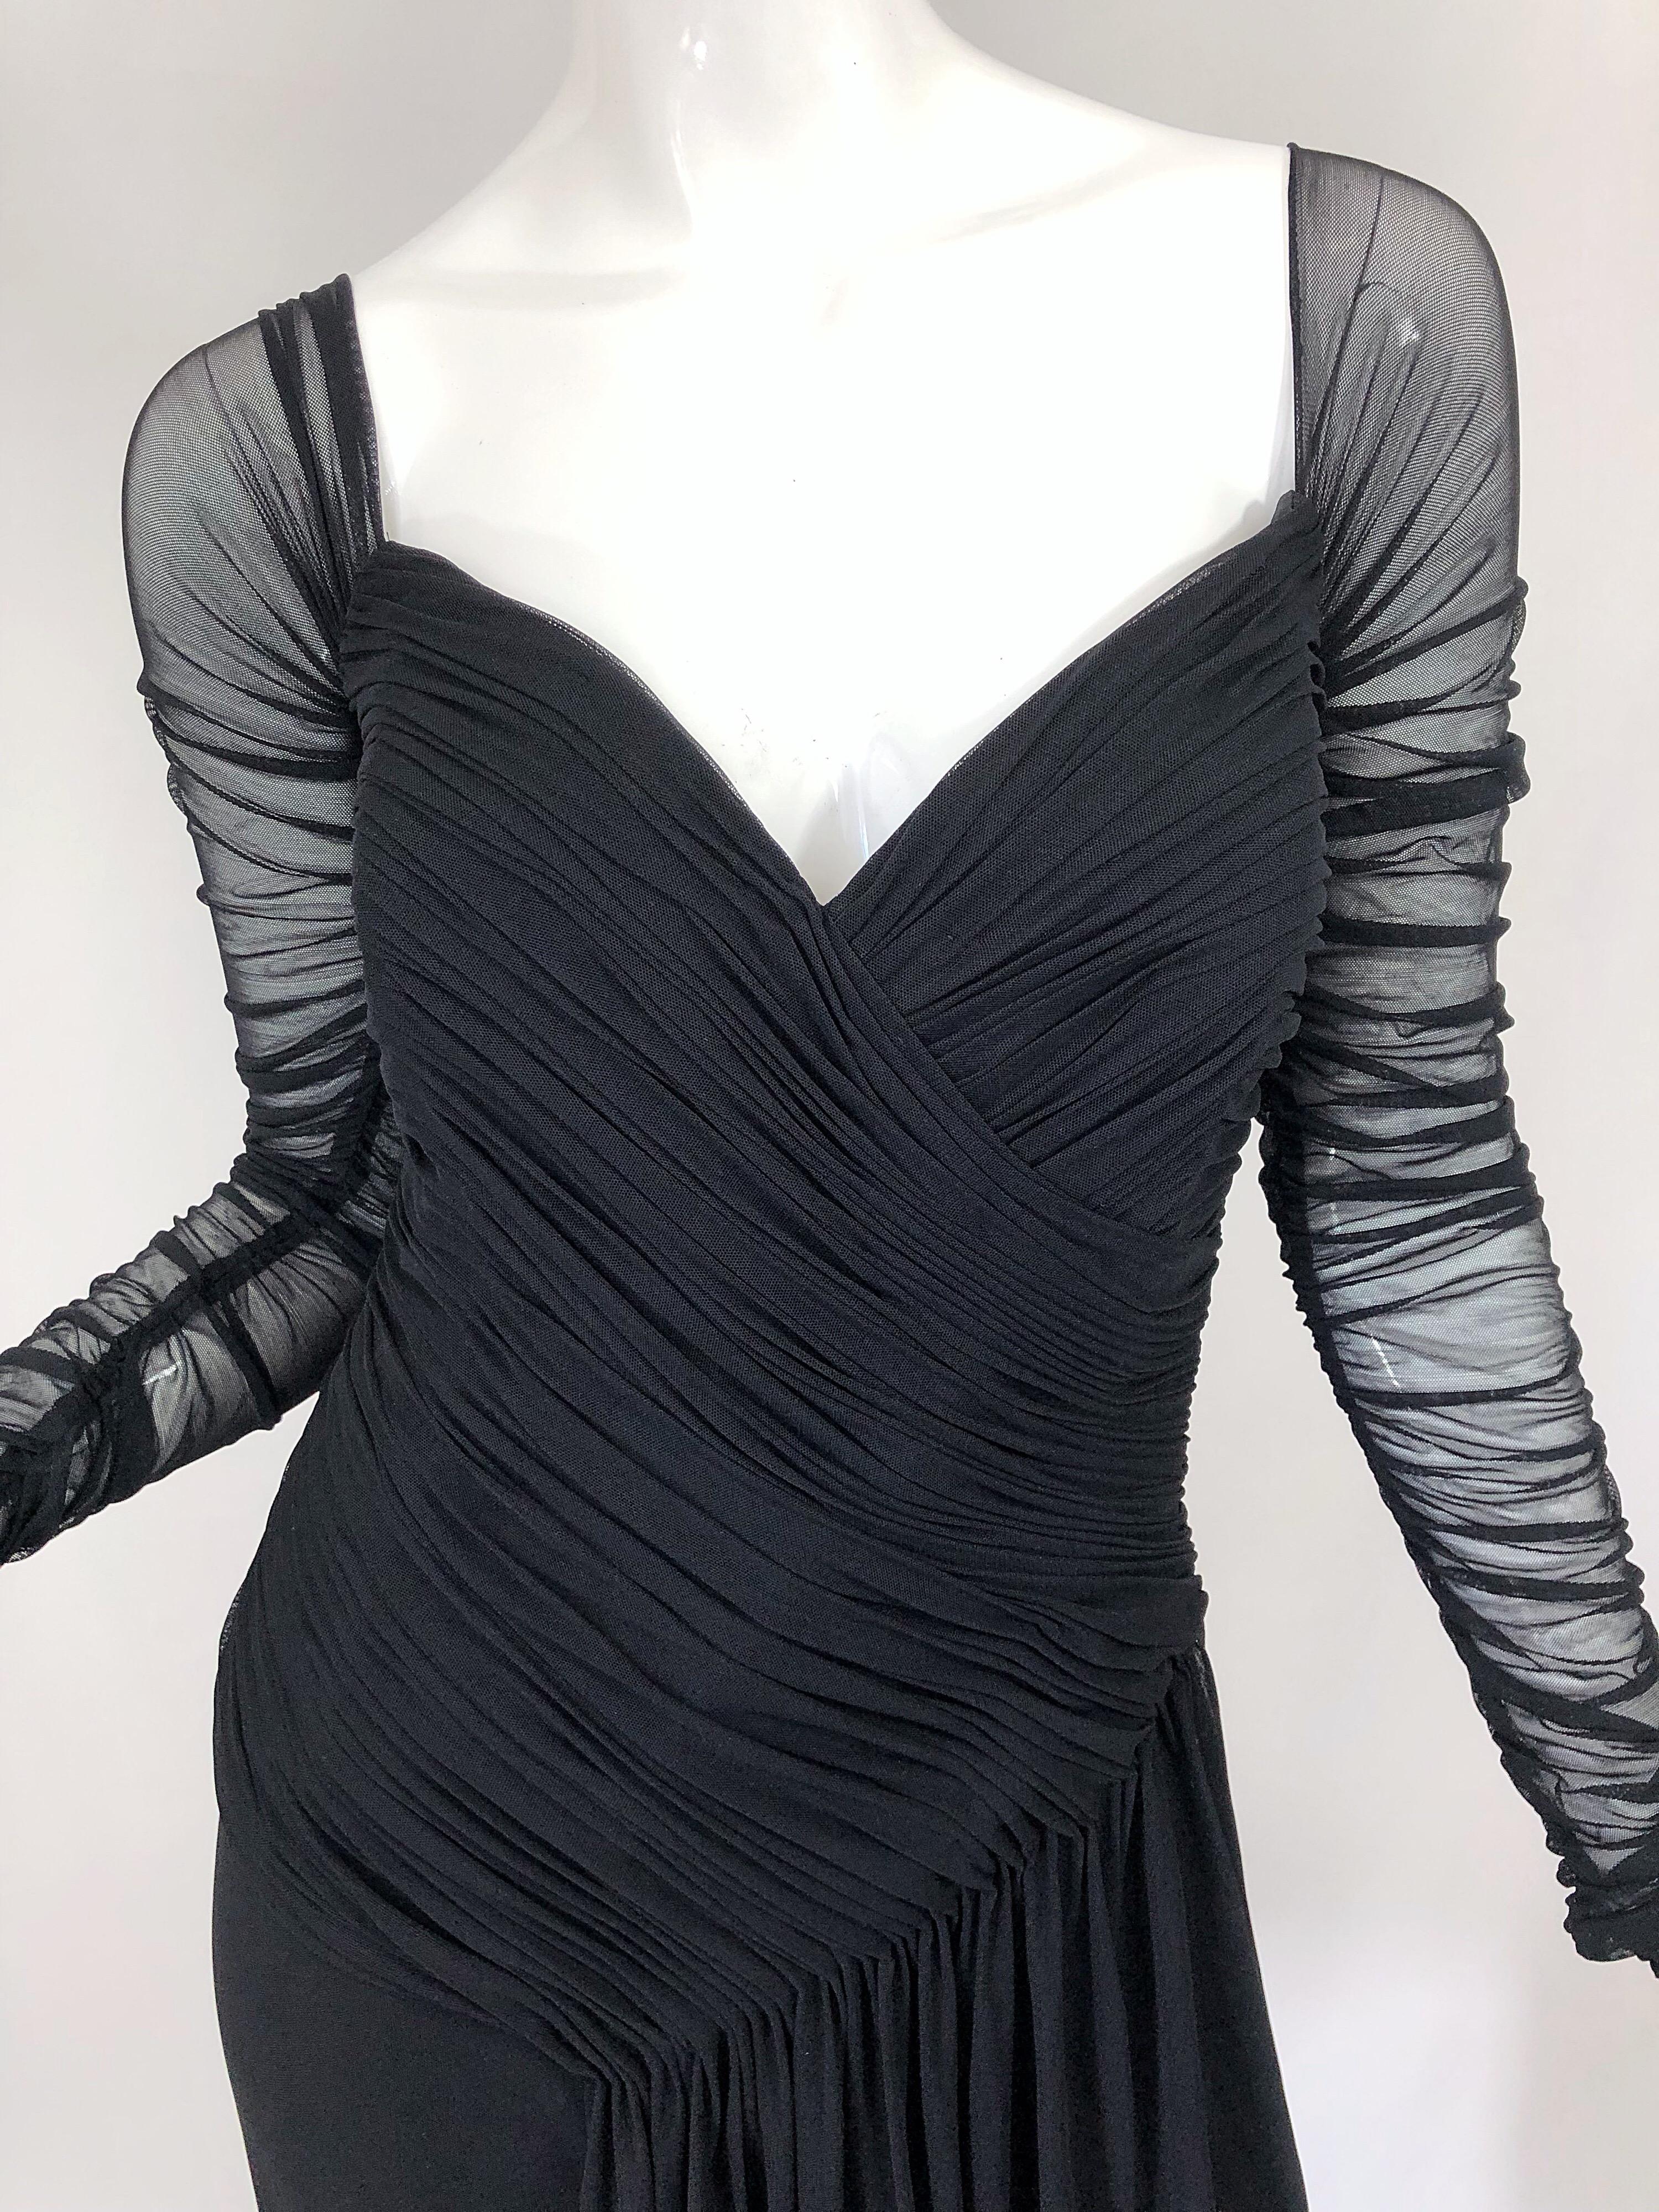 Vintage Vicky Tiel Couture 1980s Black Mesh Sweetheart Flirty Cocktail Dress LBD In Excellent Condition For Sale In San Diego, CA